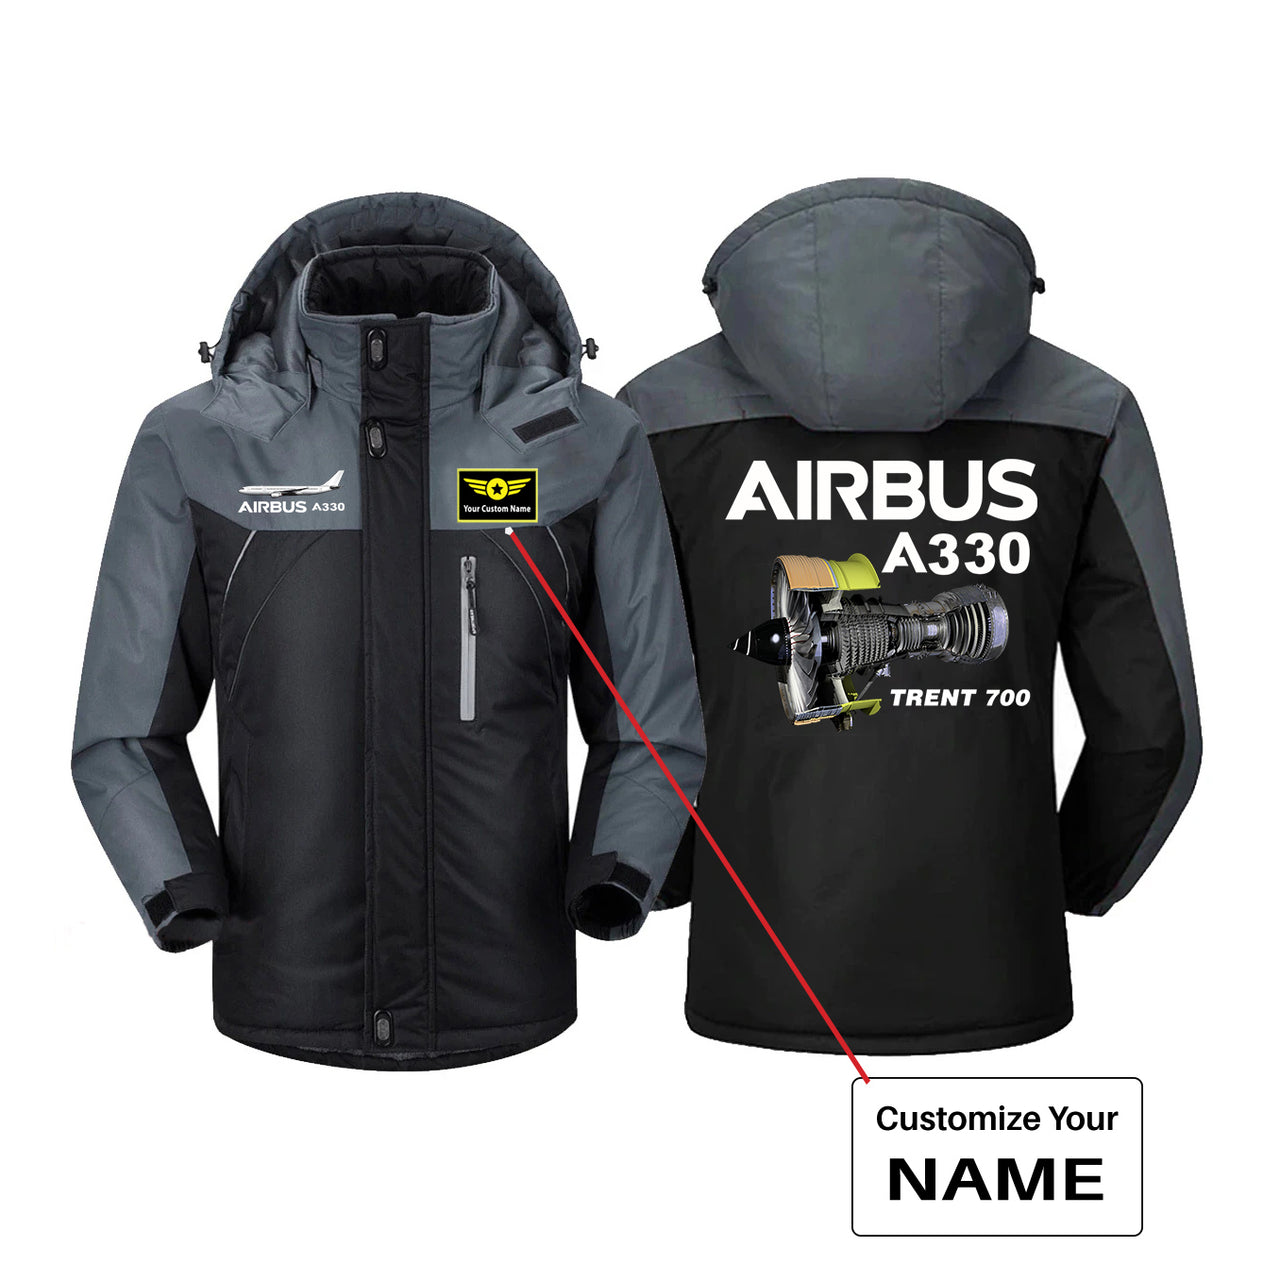 Airbus A330 & Trent 700 Engine Designed Thick Winter Jackets